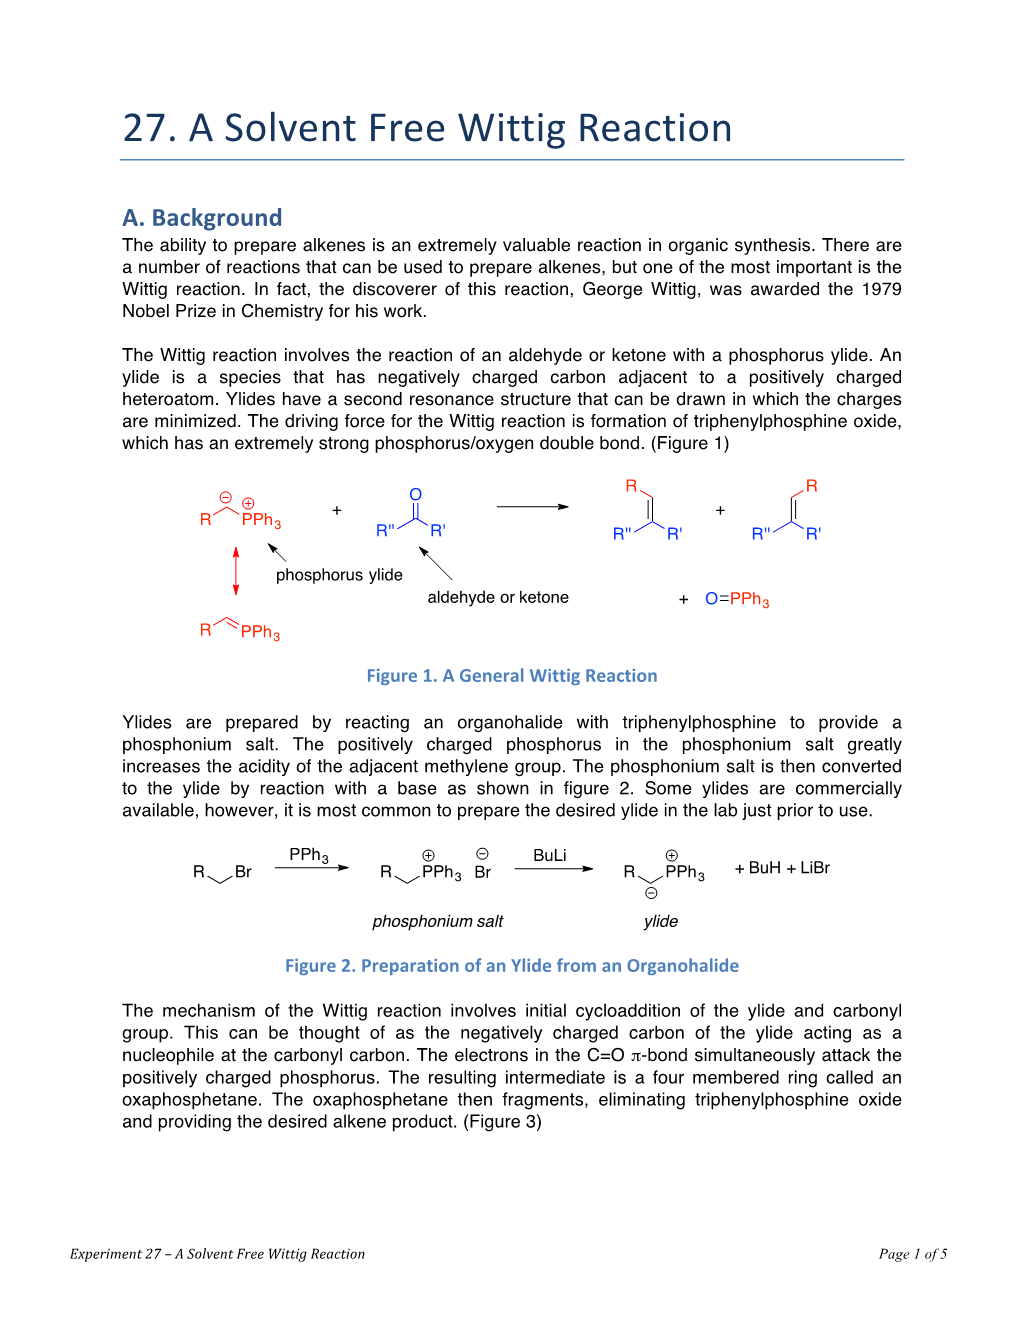 27. a Solvent Free Wittig Reaction